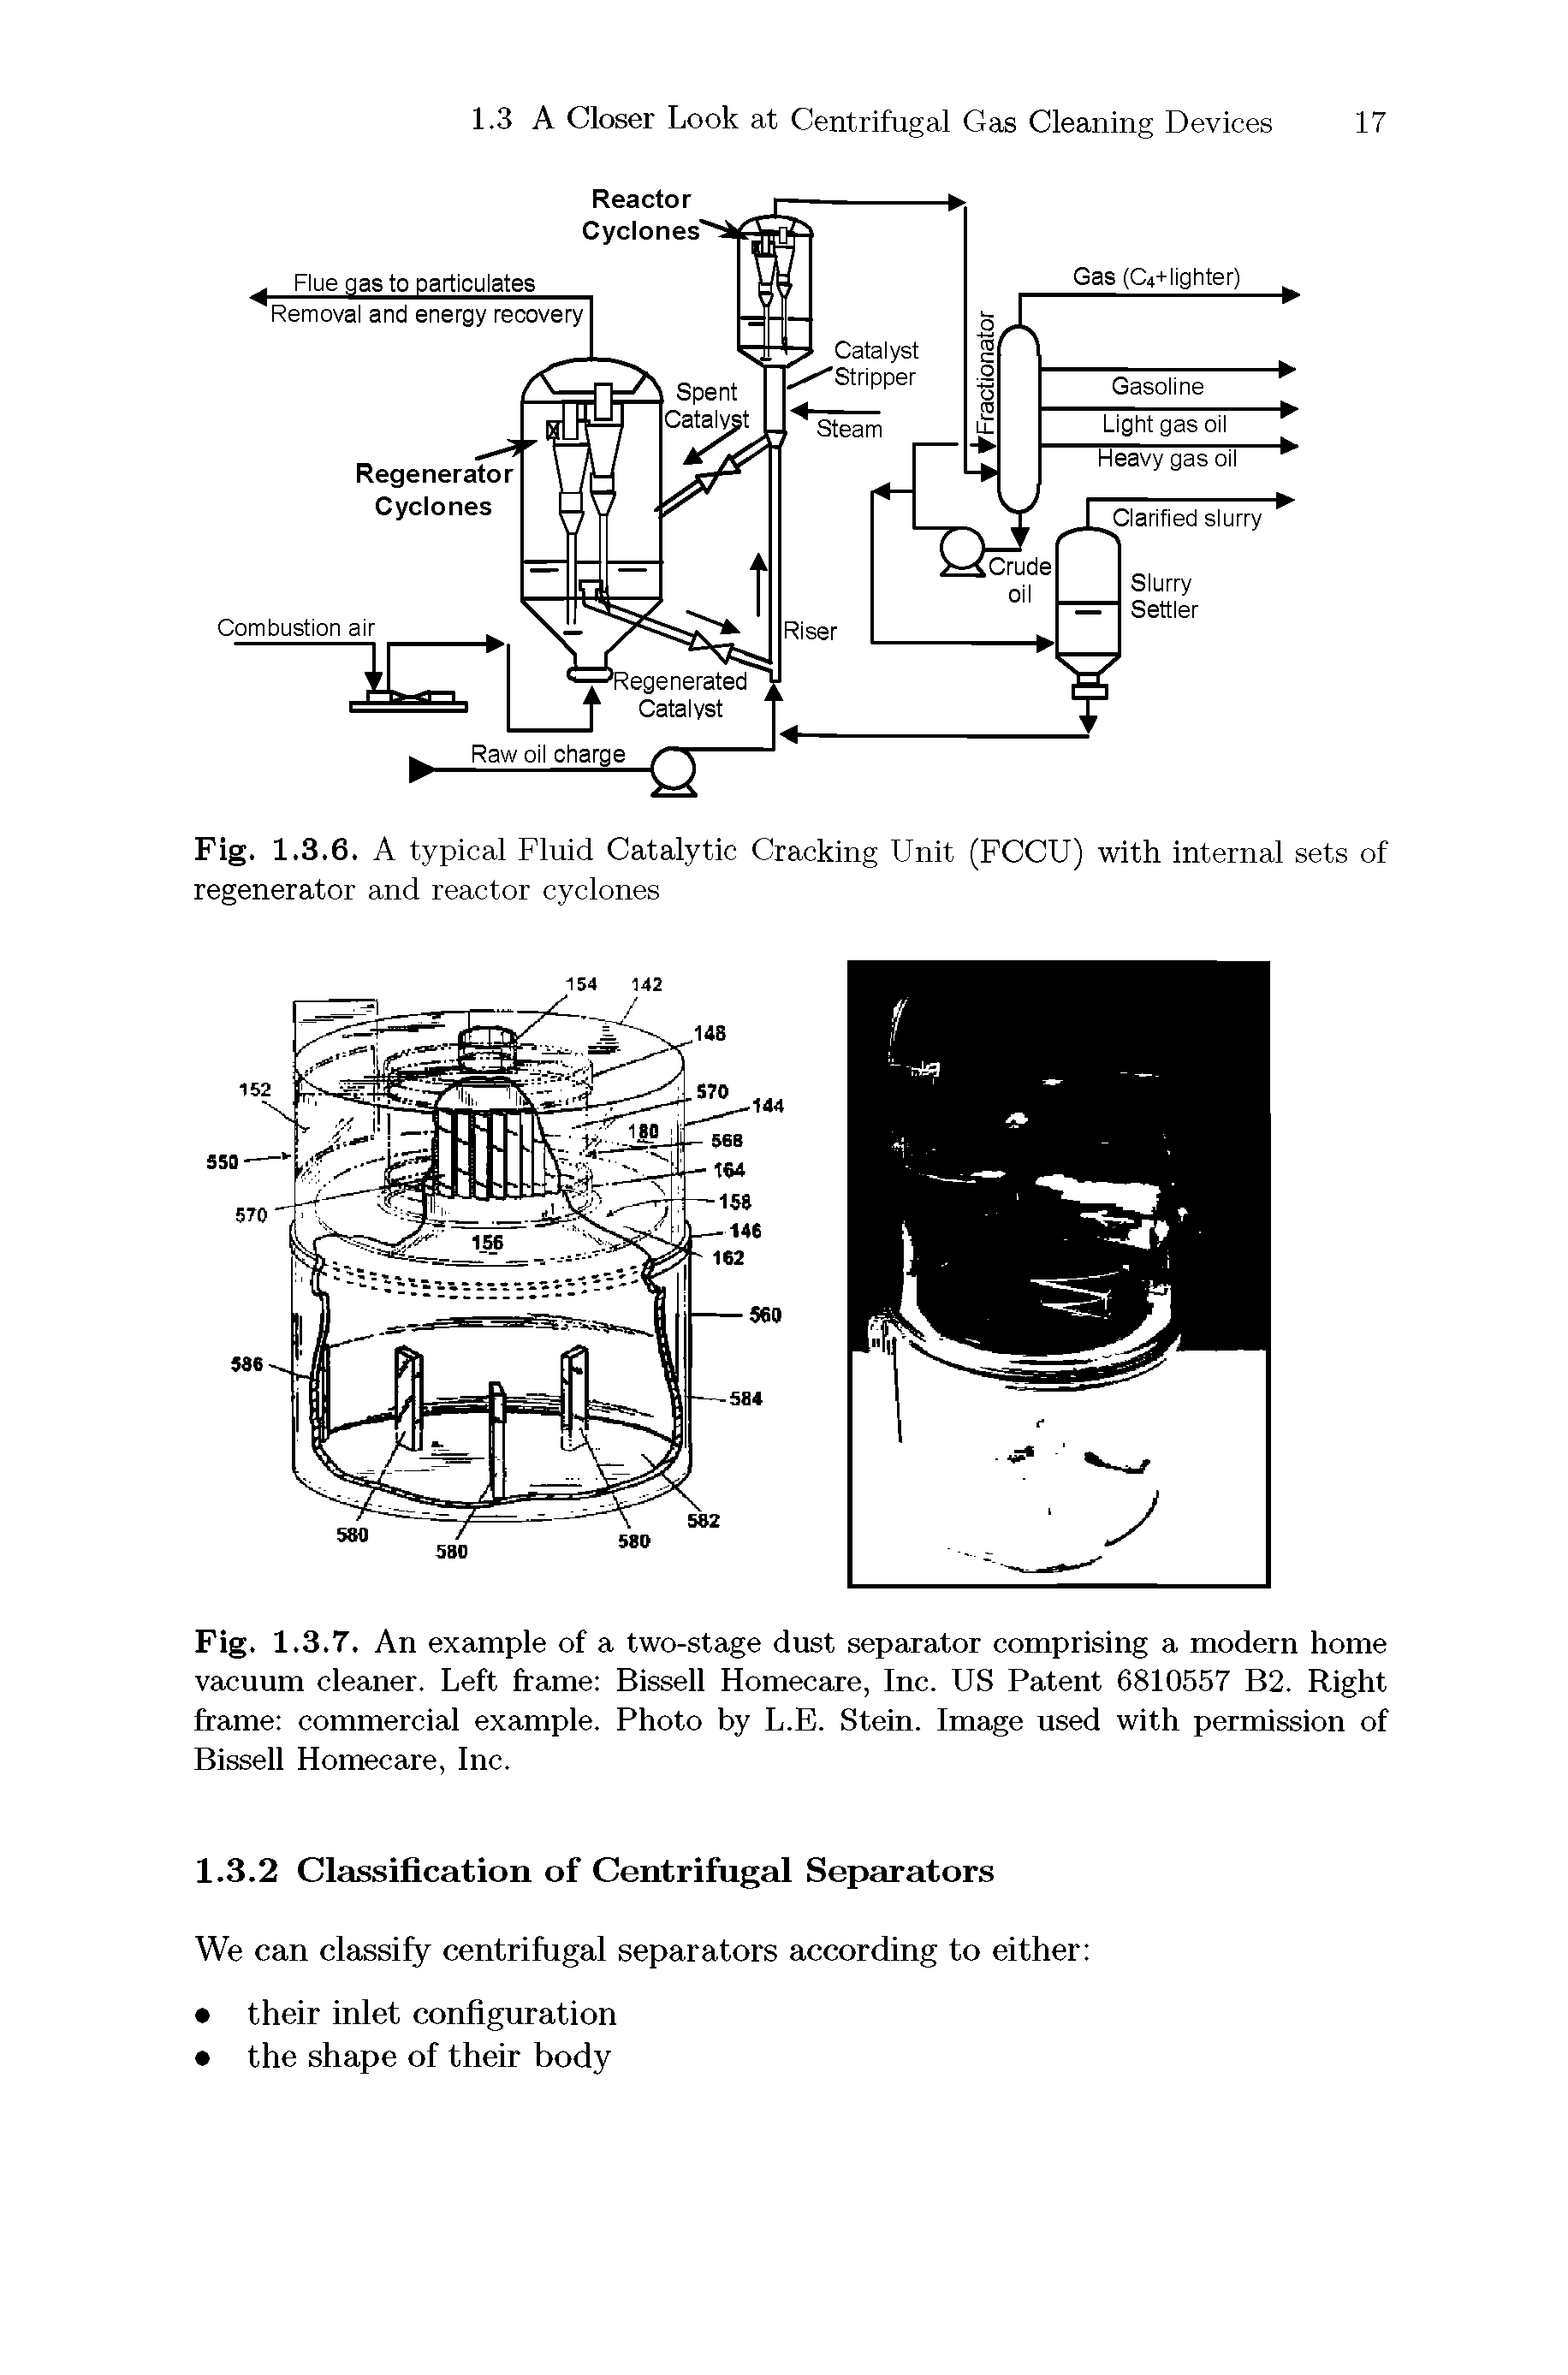 Fig. 1.3.6. A typical Fluid Catalytic Cracking Unit (FCCU) with internal sets of regenerator and reactor cyclones...